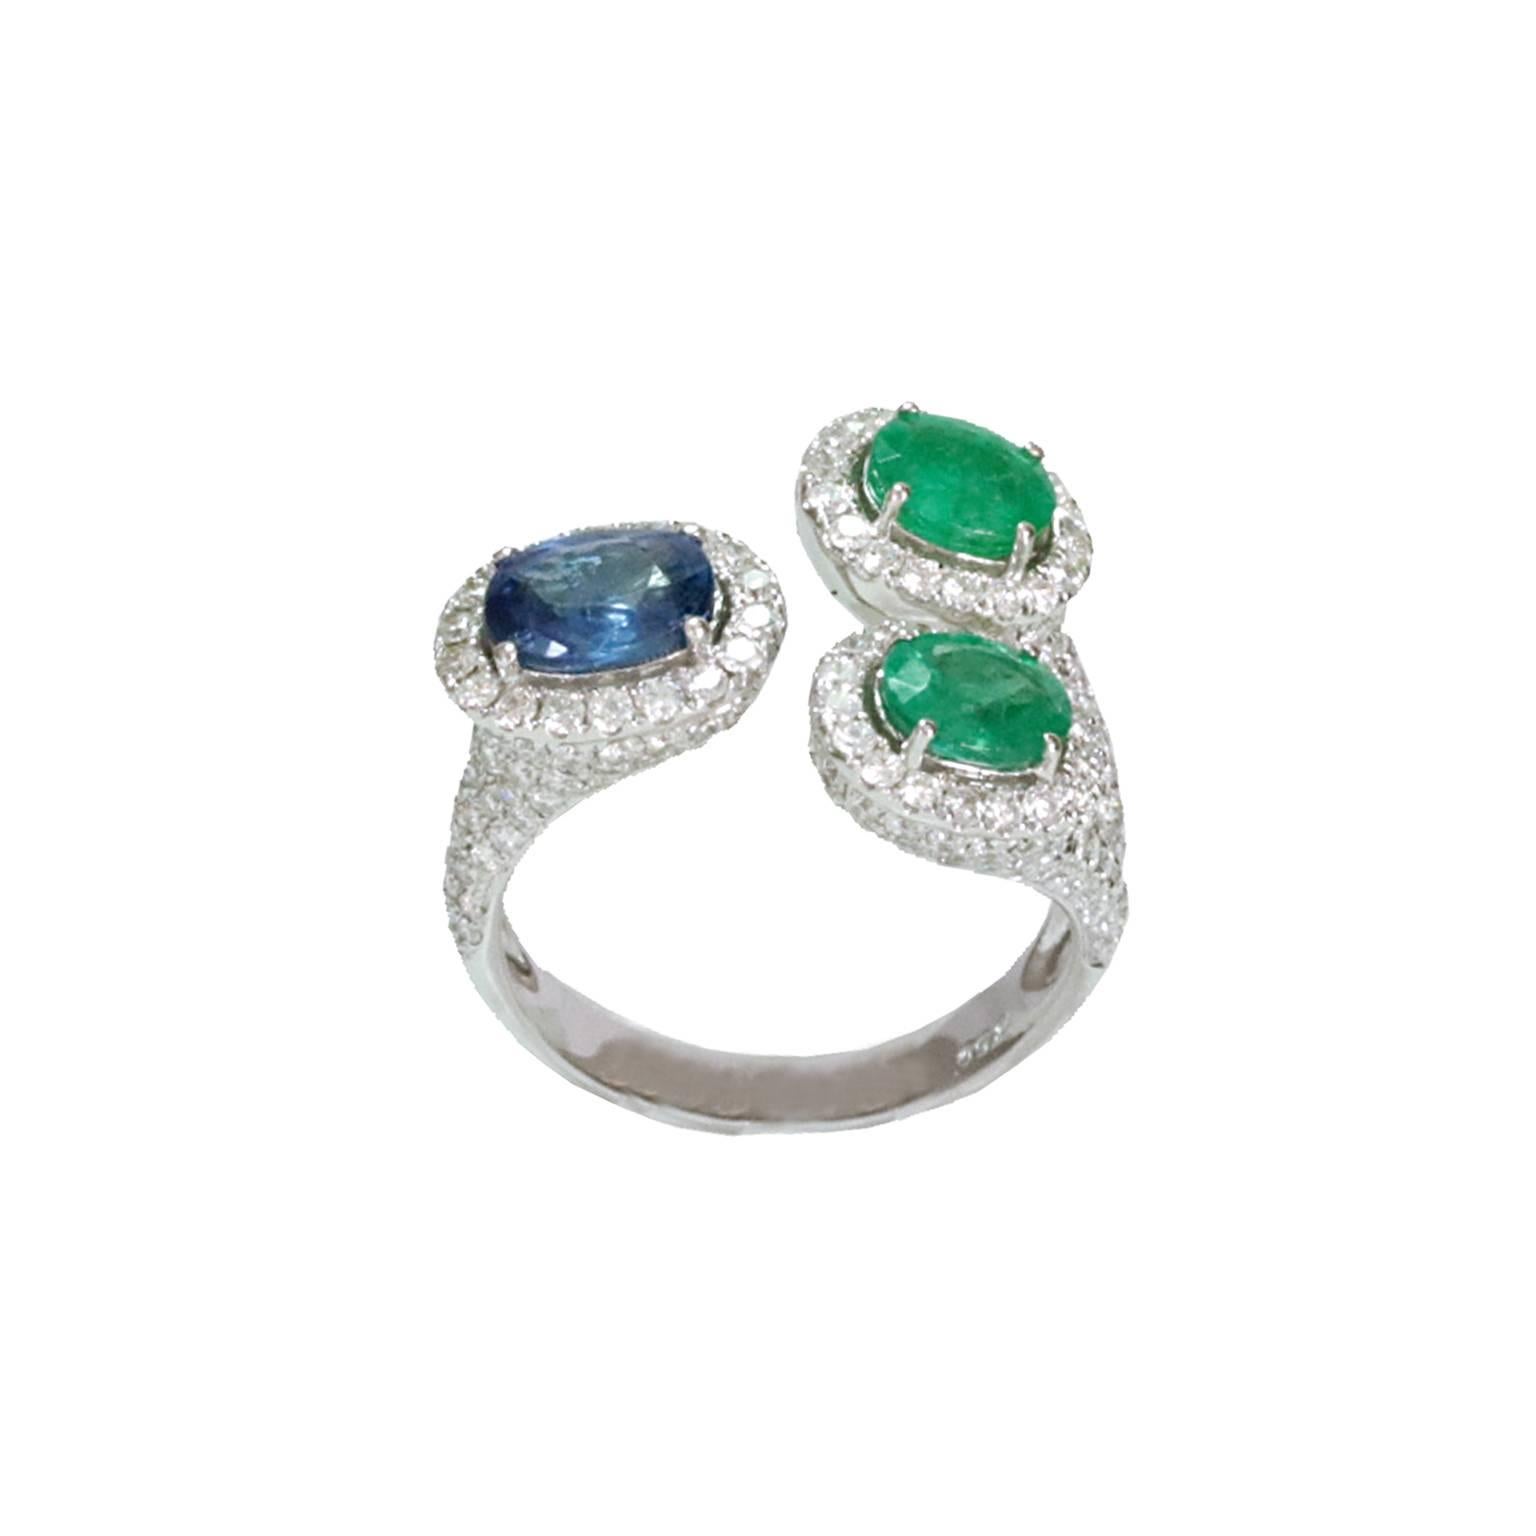 This fashion trio ring contains approx. 1.20ct of blue sapphire, approx. 1.30cts of emeralds and 1.94cts of diamonds.

Size 7, please contact if sizing is necessary.